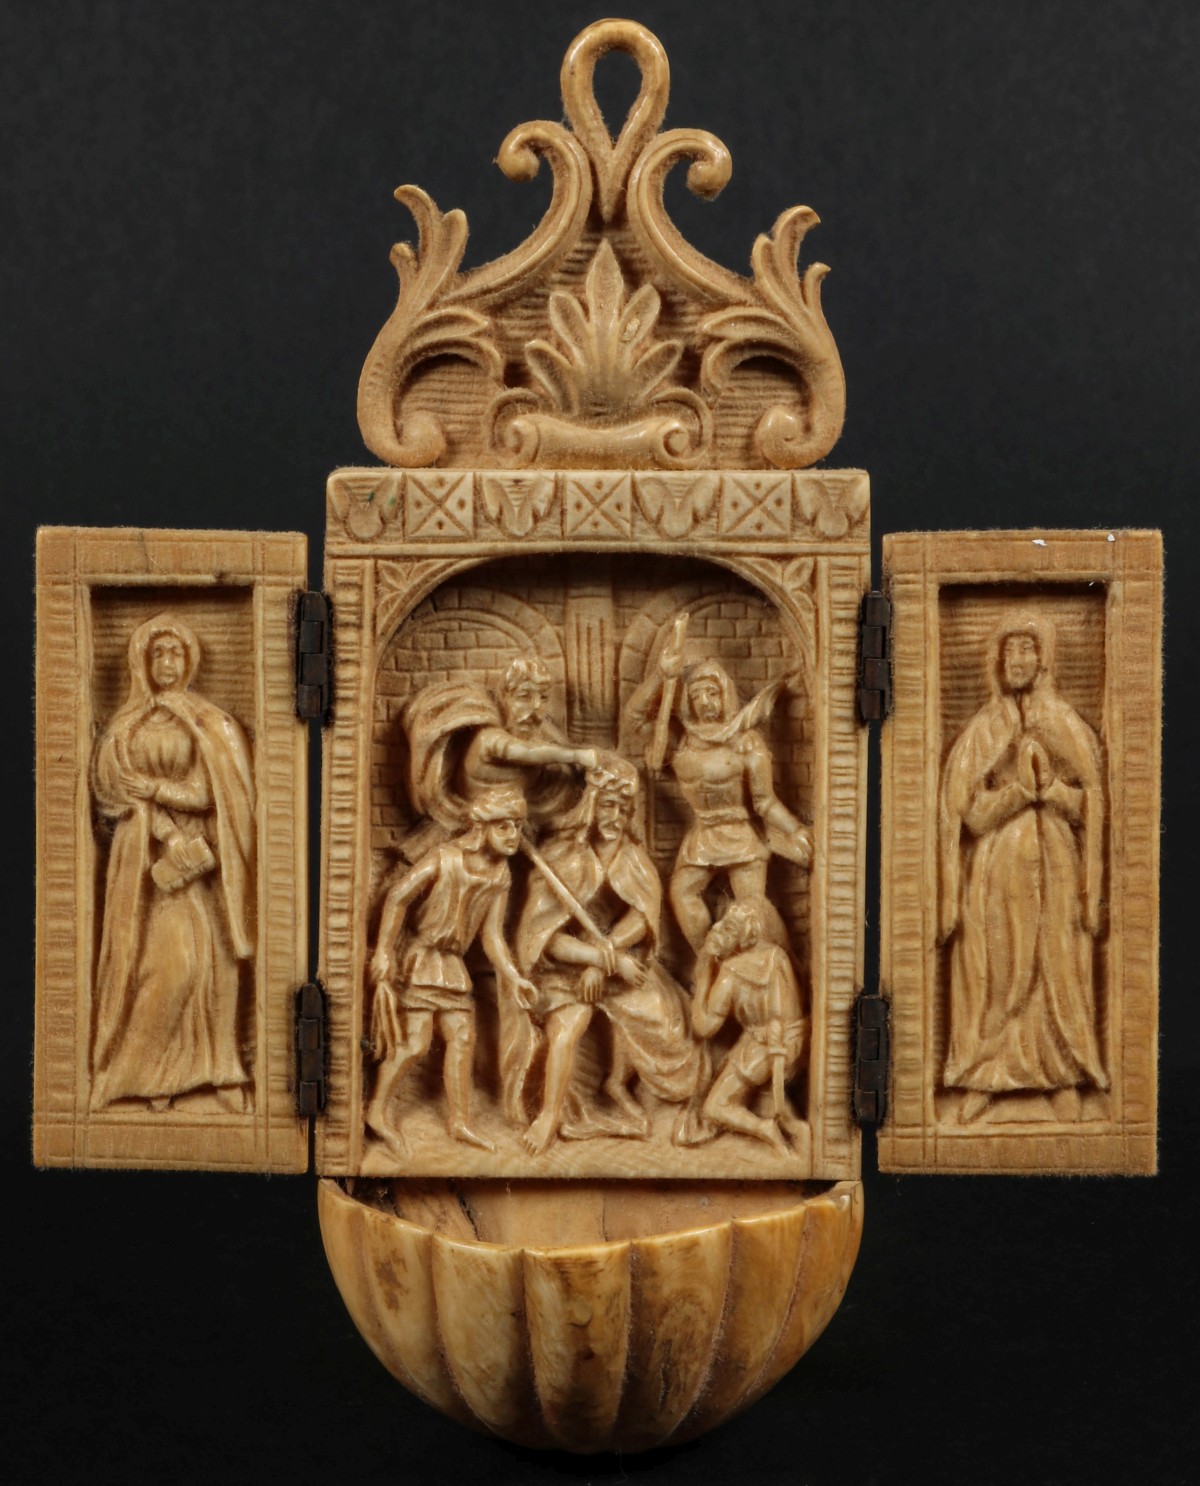 AN 18TH/19TH C. CARVED IVORY TRIPTYCH HOLY WATER FONT